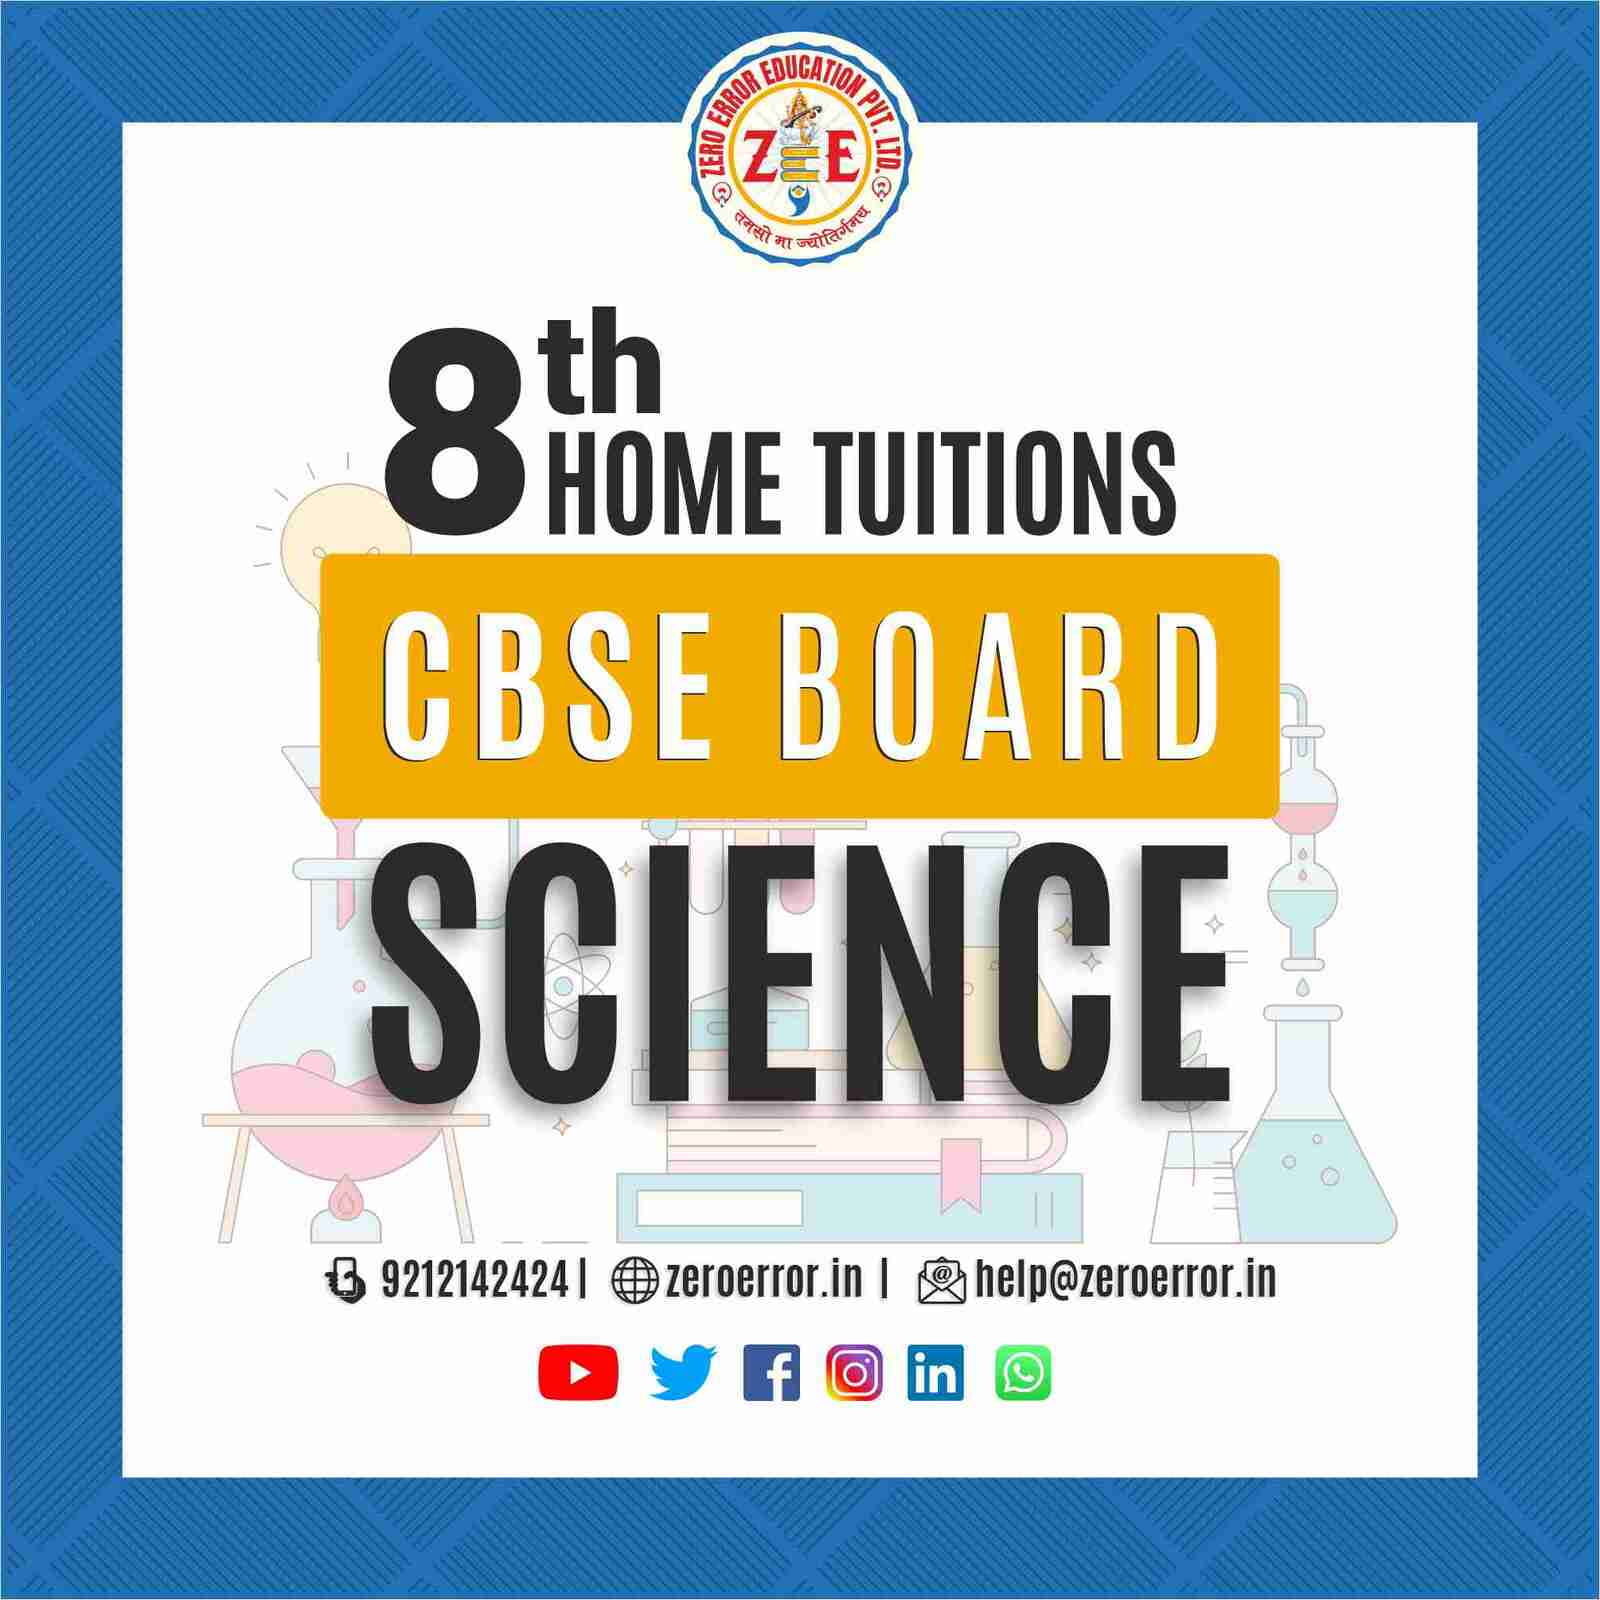 8th Grade CBSE Science Online Classes by Zero Error Education Prepare for your CBSE board exams with online and offline Science classes for 8th grade. Learn from experienced home tutors and get all the help you need to succeed. Enroll today at Zero Error Education. [https://zeroerror.in/] Call 9212142424 for more information.